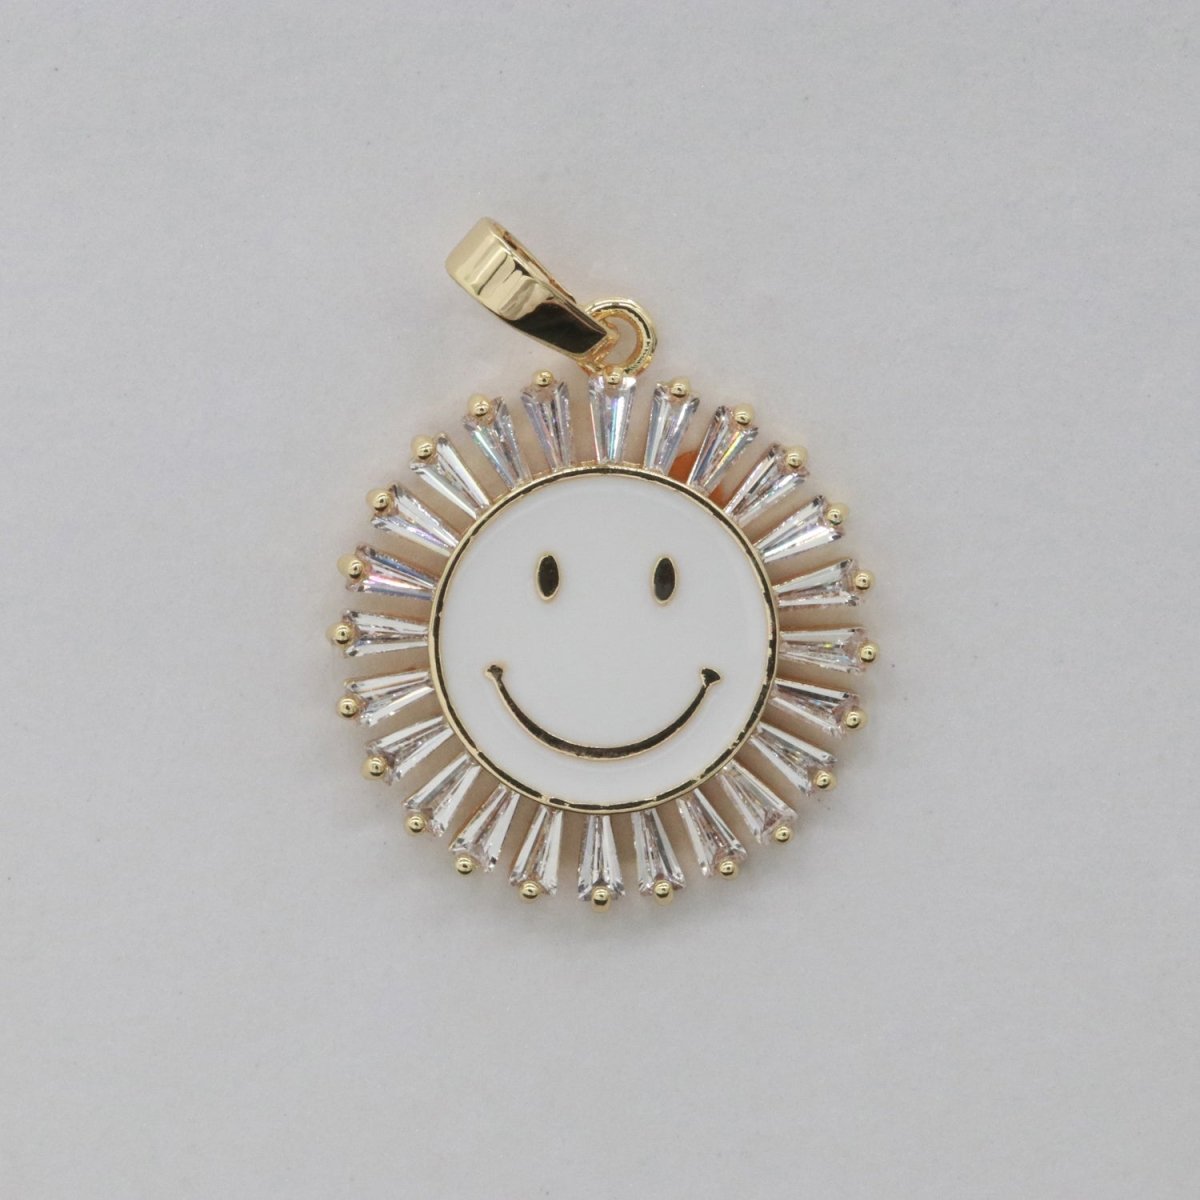 Round Smiley Face Charm Cubic Happy Face Pendant for Necklace Earring Component I-424 I-438 I-441 I-443 I-614 I-757 - DLUXCA